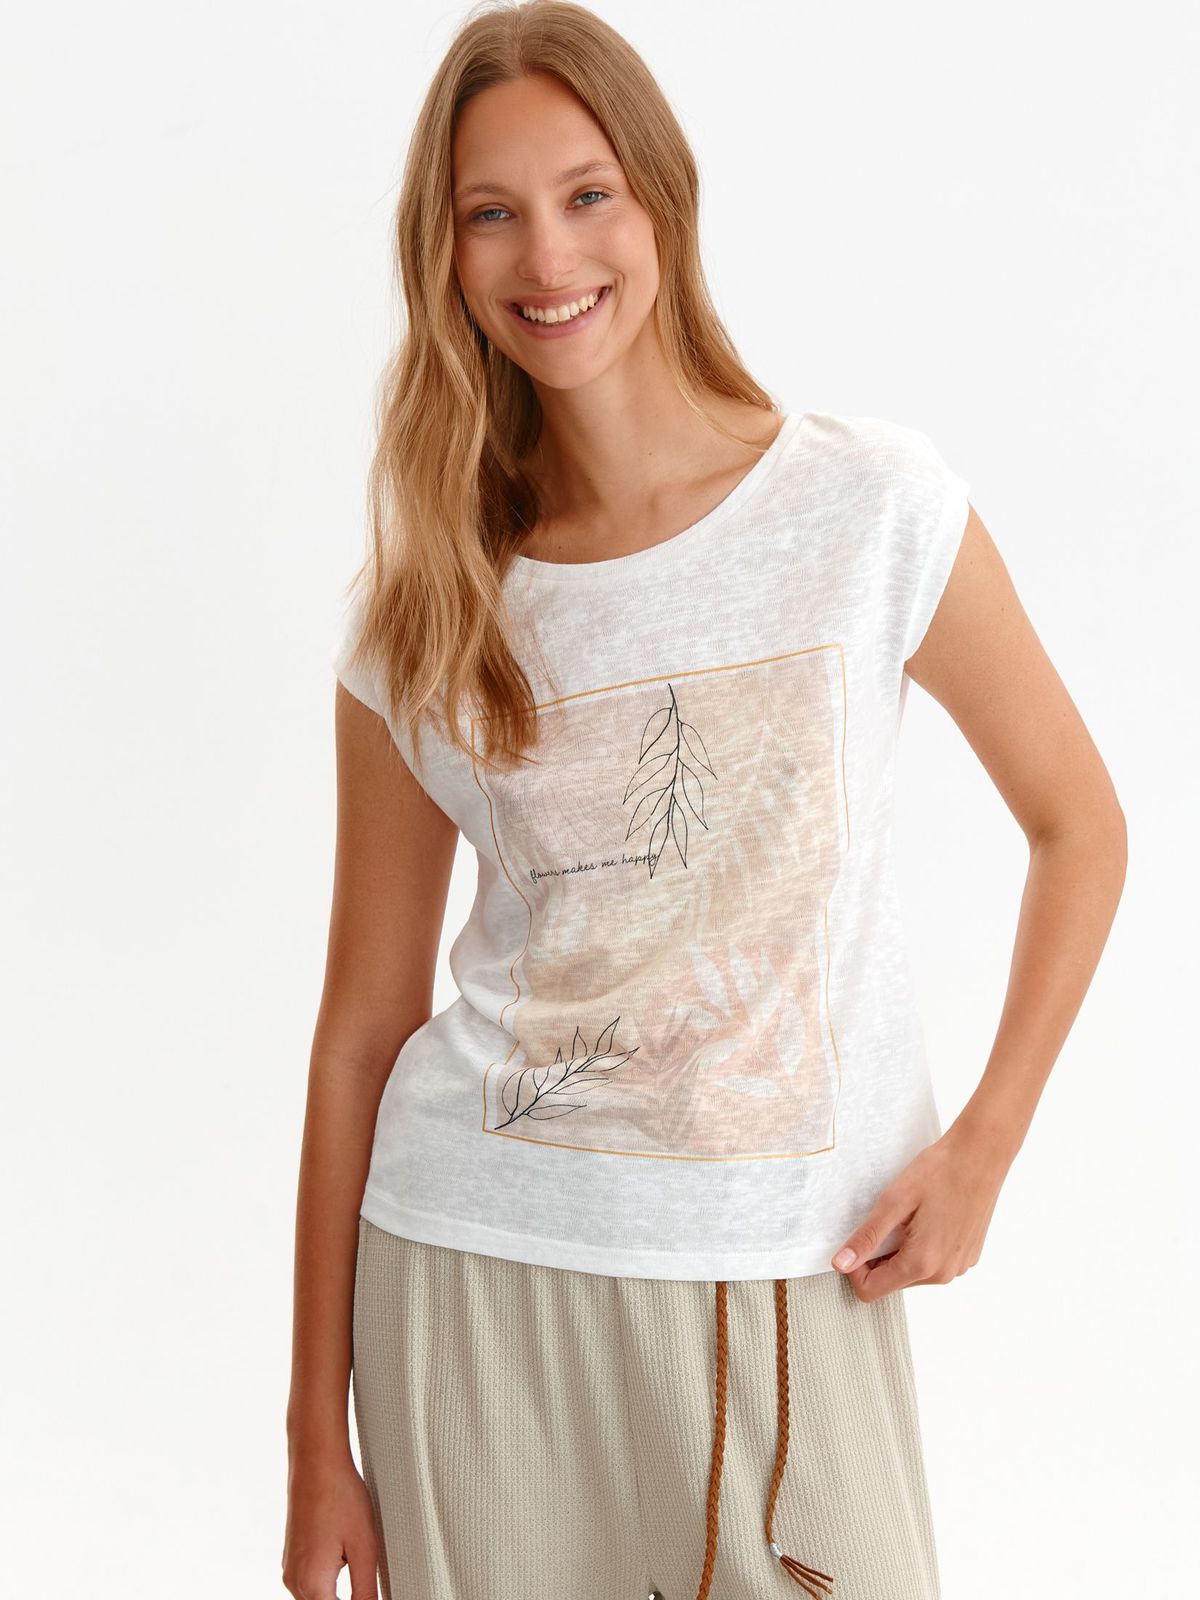 White t-shirt thin fabric loose fit abstract